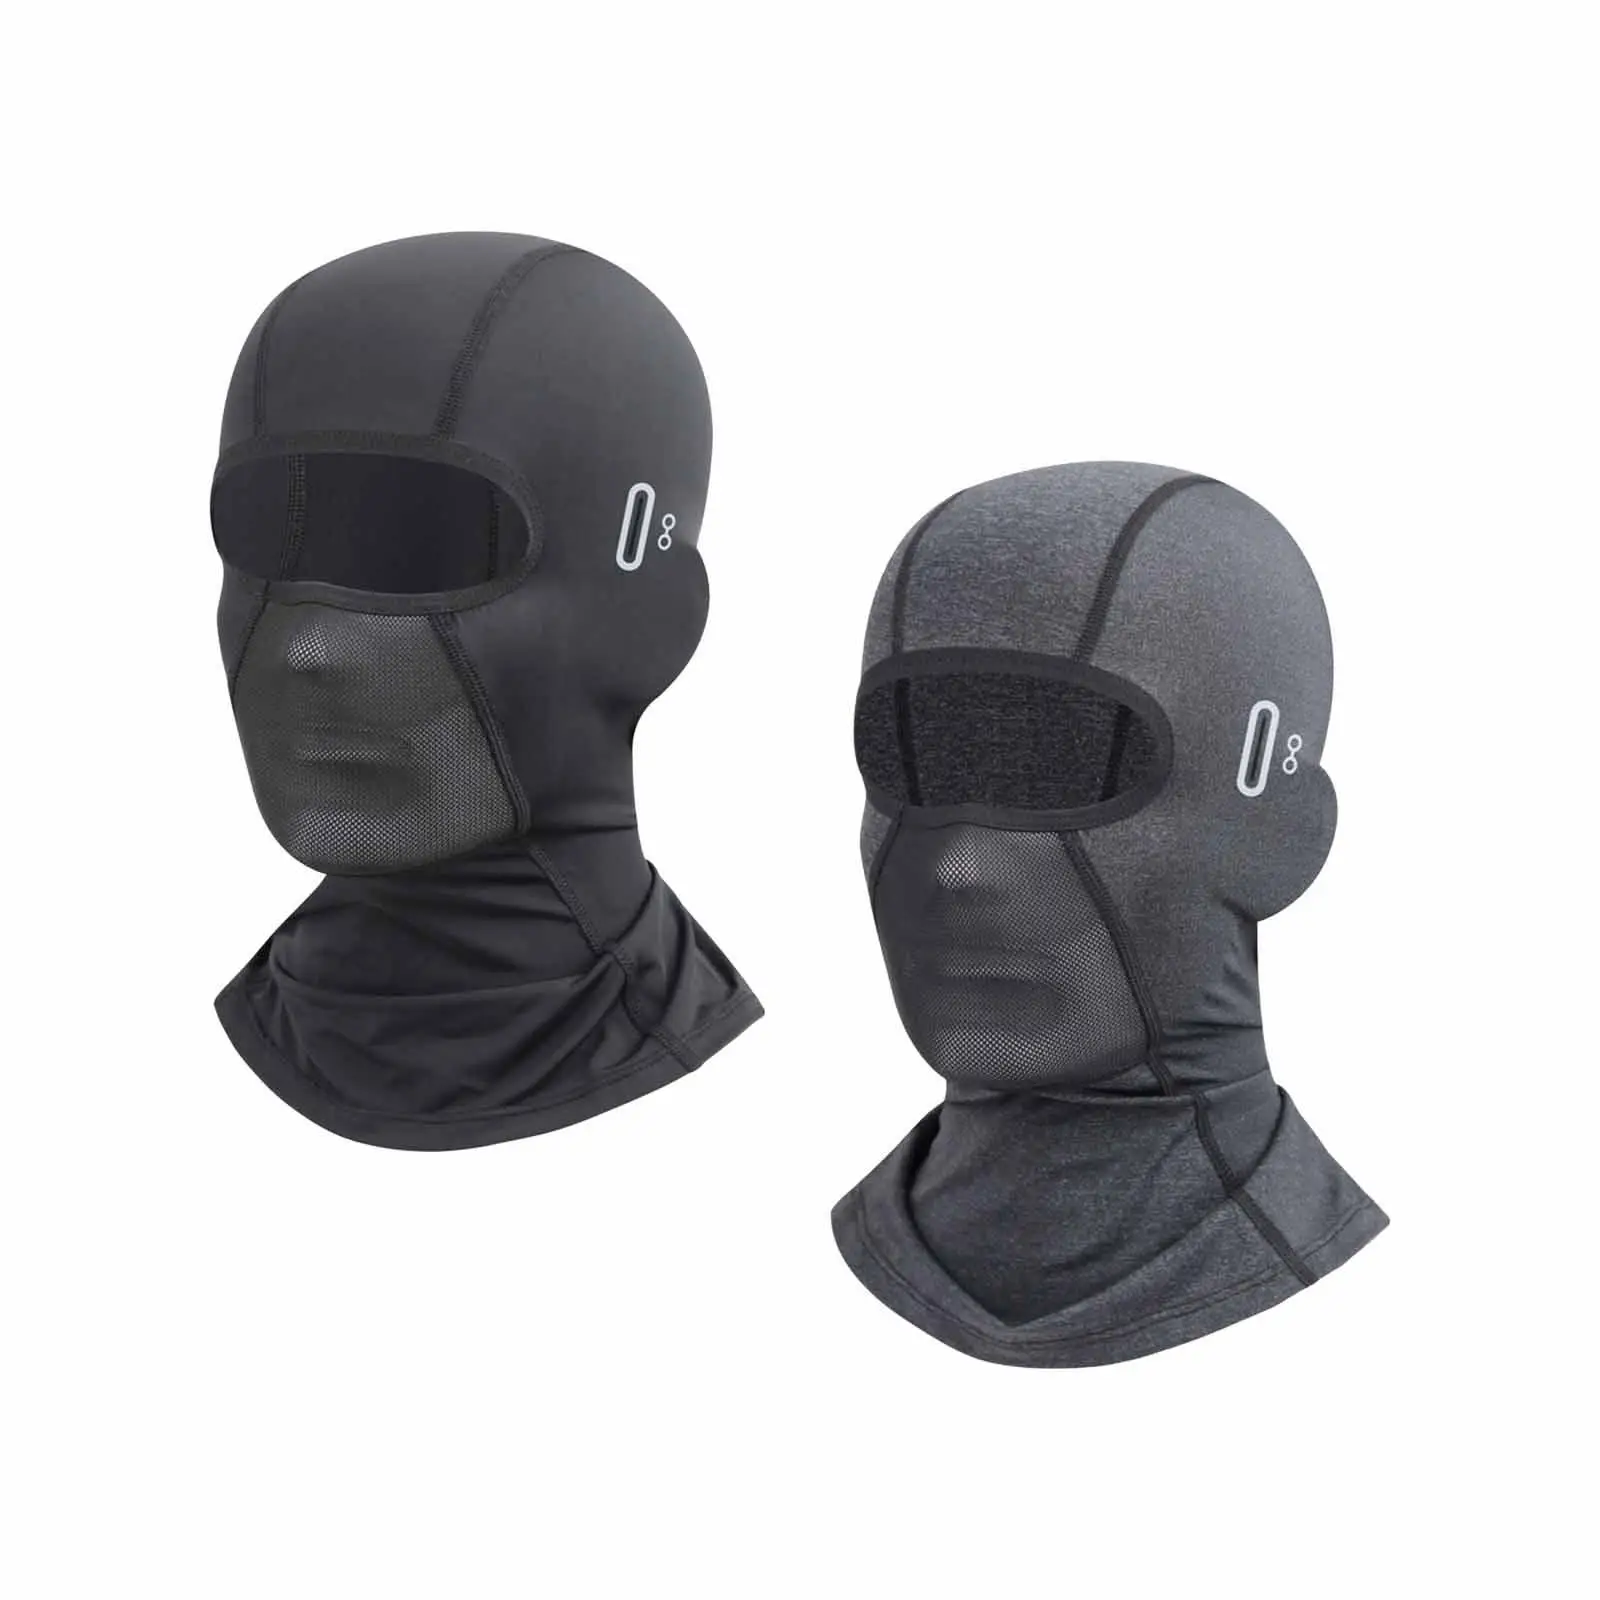 Balaclava Face Mask Cooling Summer Windproof Sun Protection Full Face Mask for Snowboarding Cycling Outdoor Riding Skiing Hiking